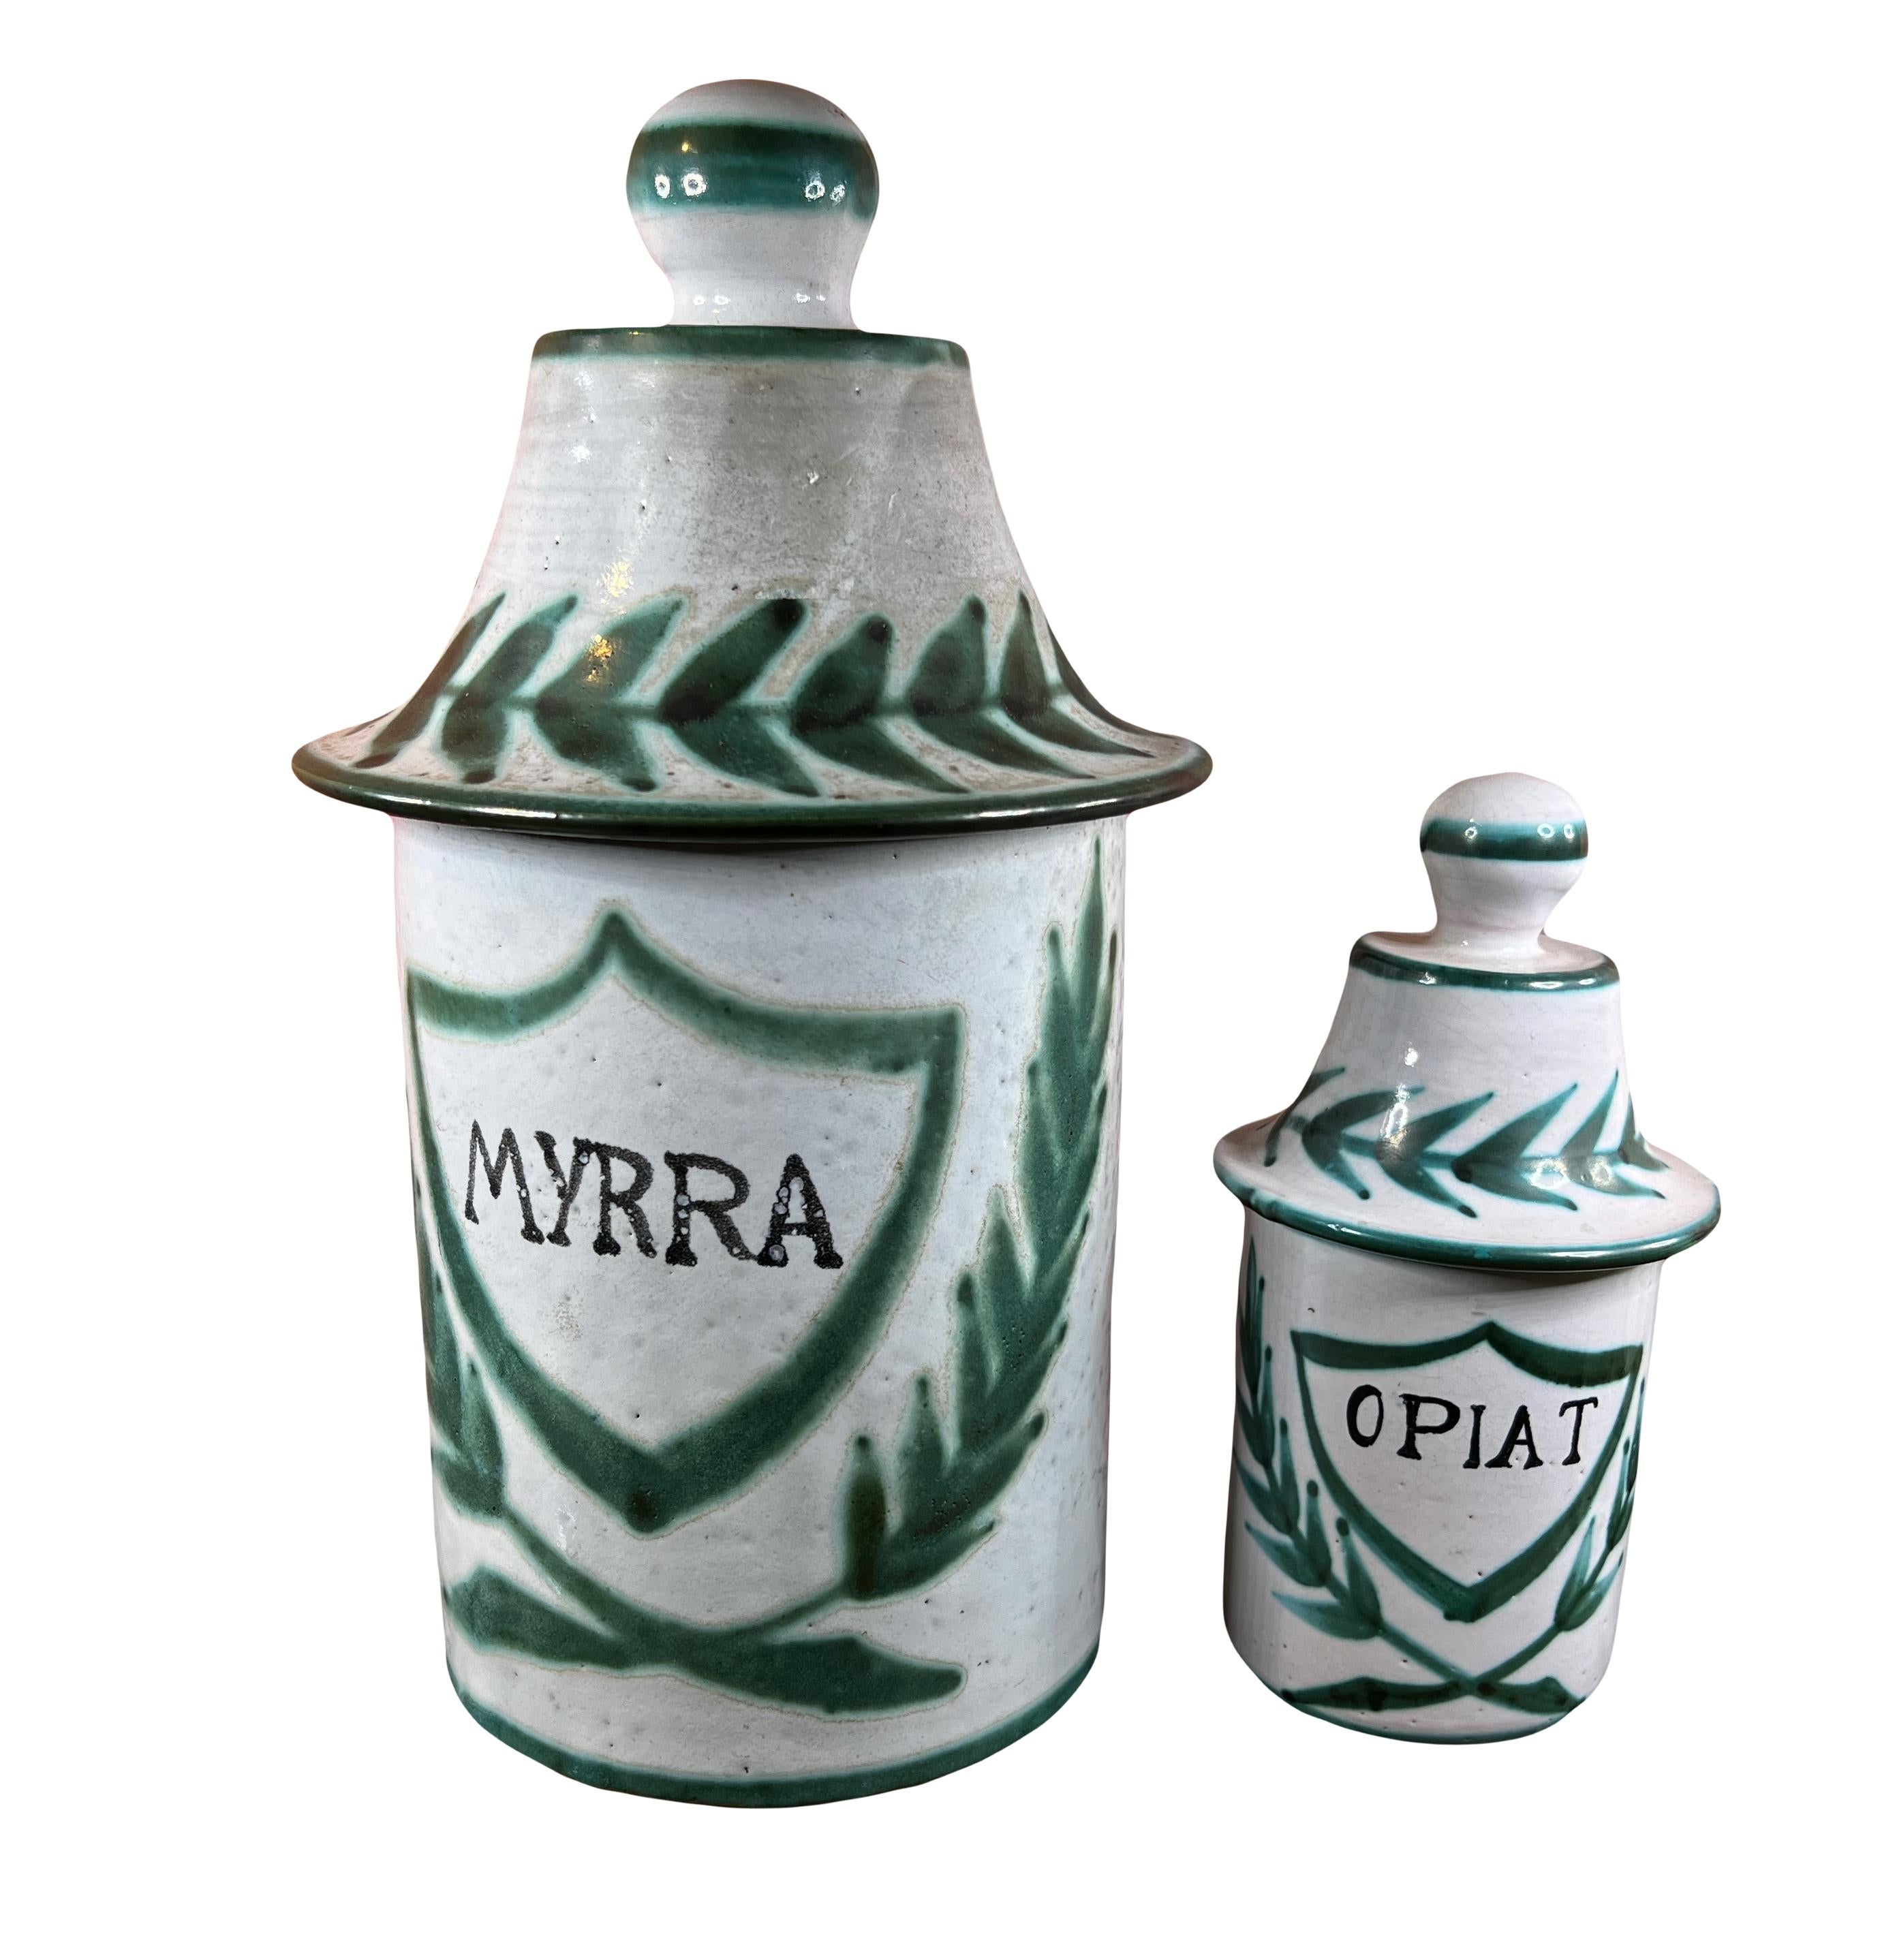 2 Robert Picault Vallauris mid-century pharmacy jars from the 50s For Sale 2